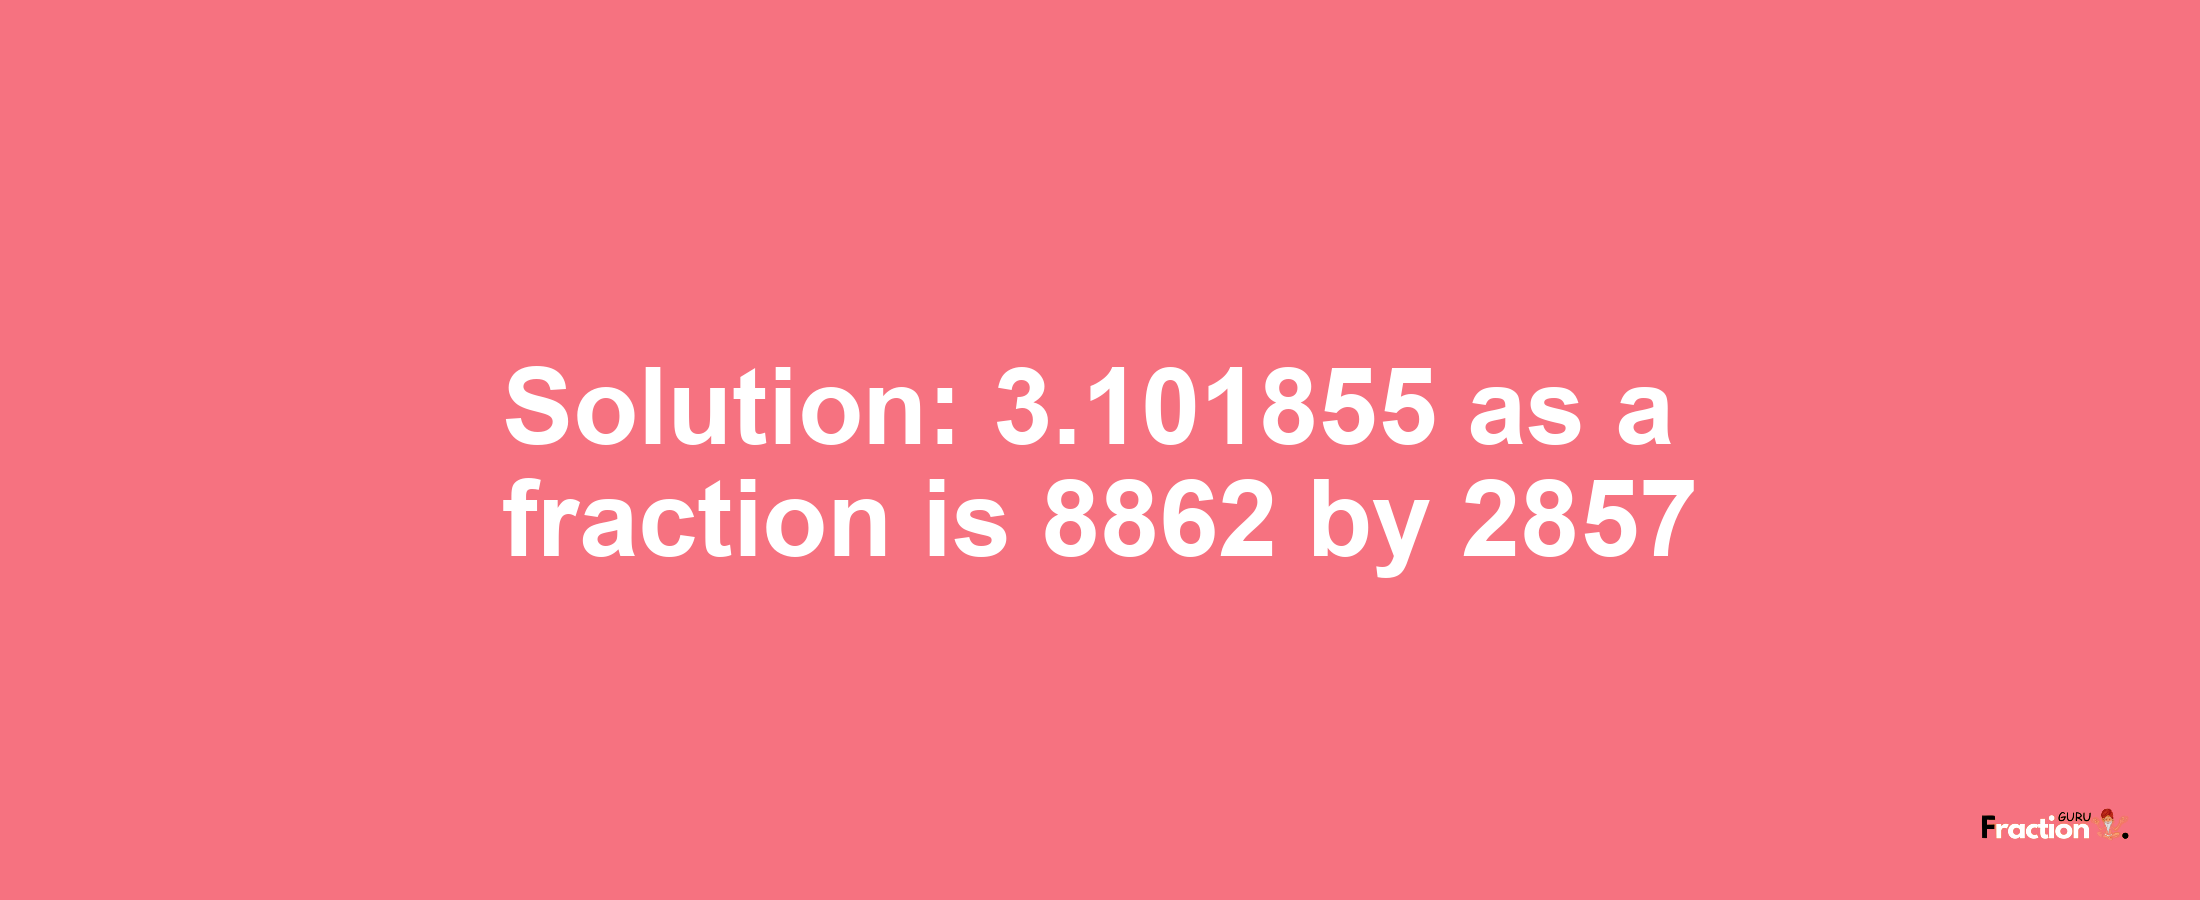 Solution:3.101855 as a fraction is 8862/2857